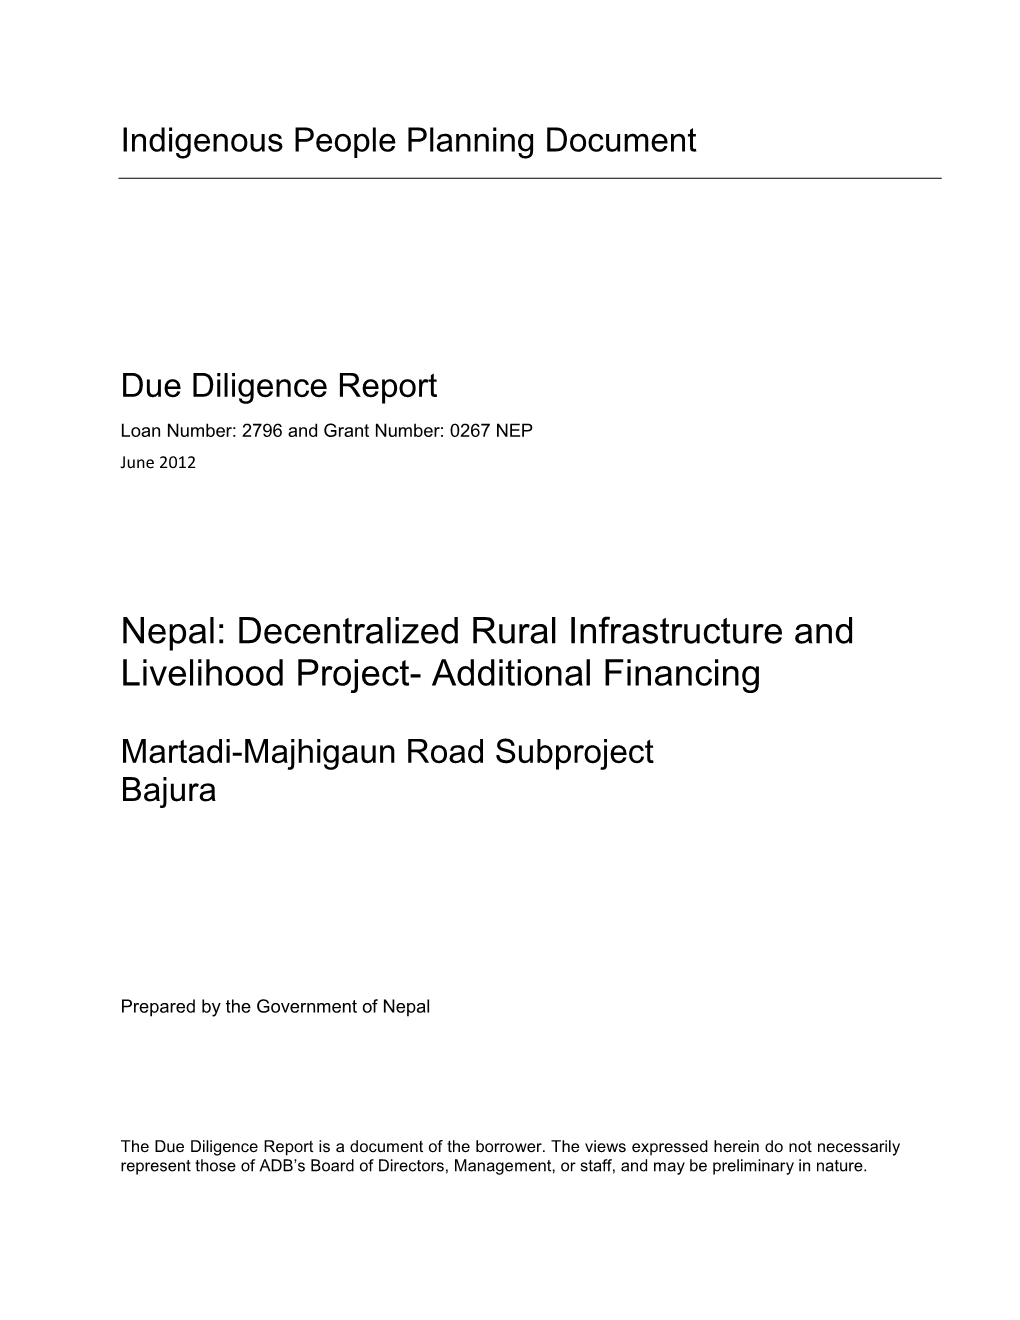 Decentralized Rural Infrastructure and Livelihood Project- Additional Financing